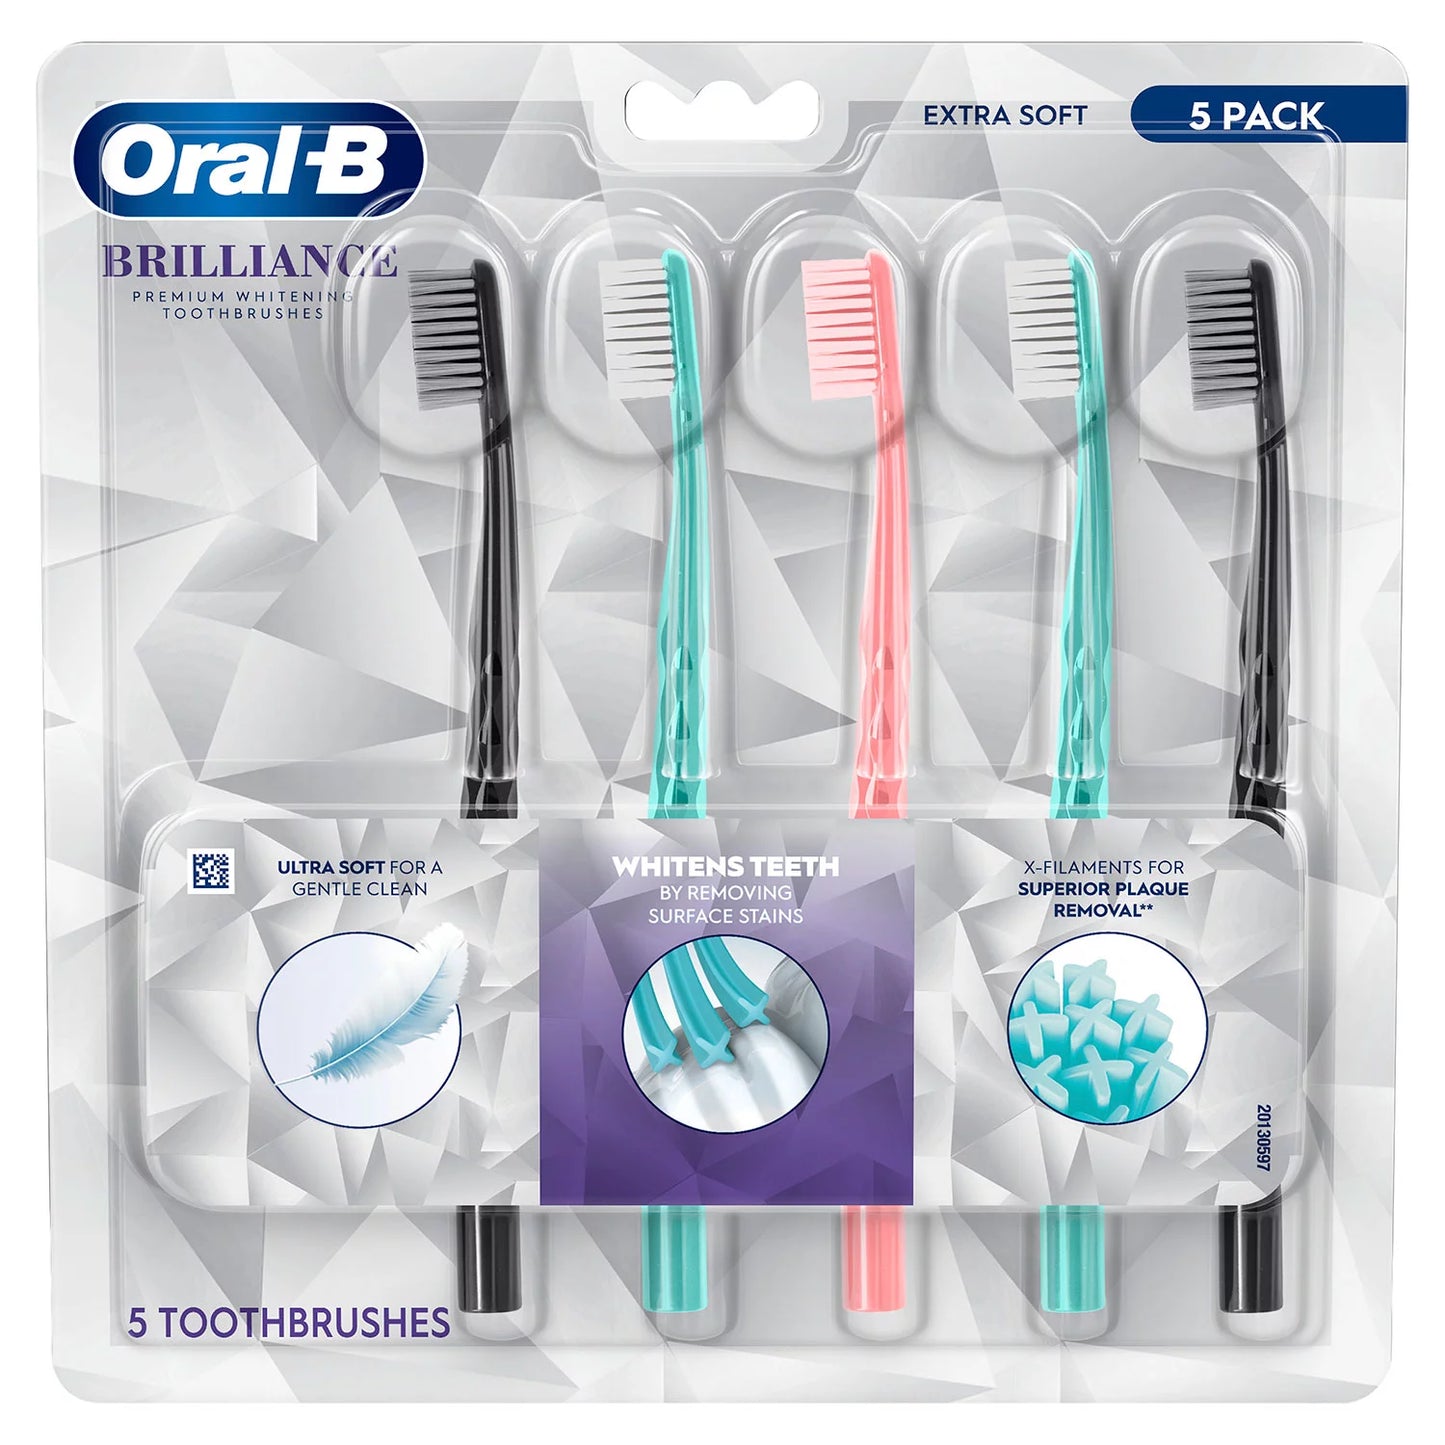 Oral-B Brilliance Whitening Toothbrush with X Filaments, Extra Soft (5 ct.)